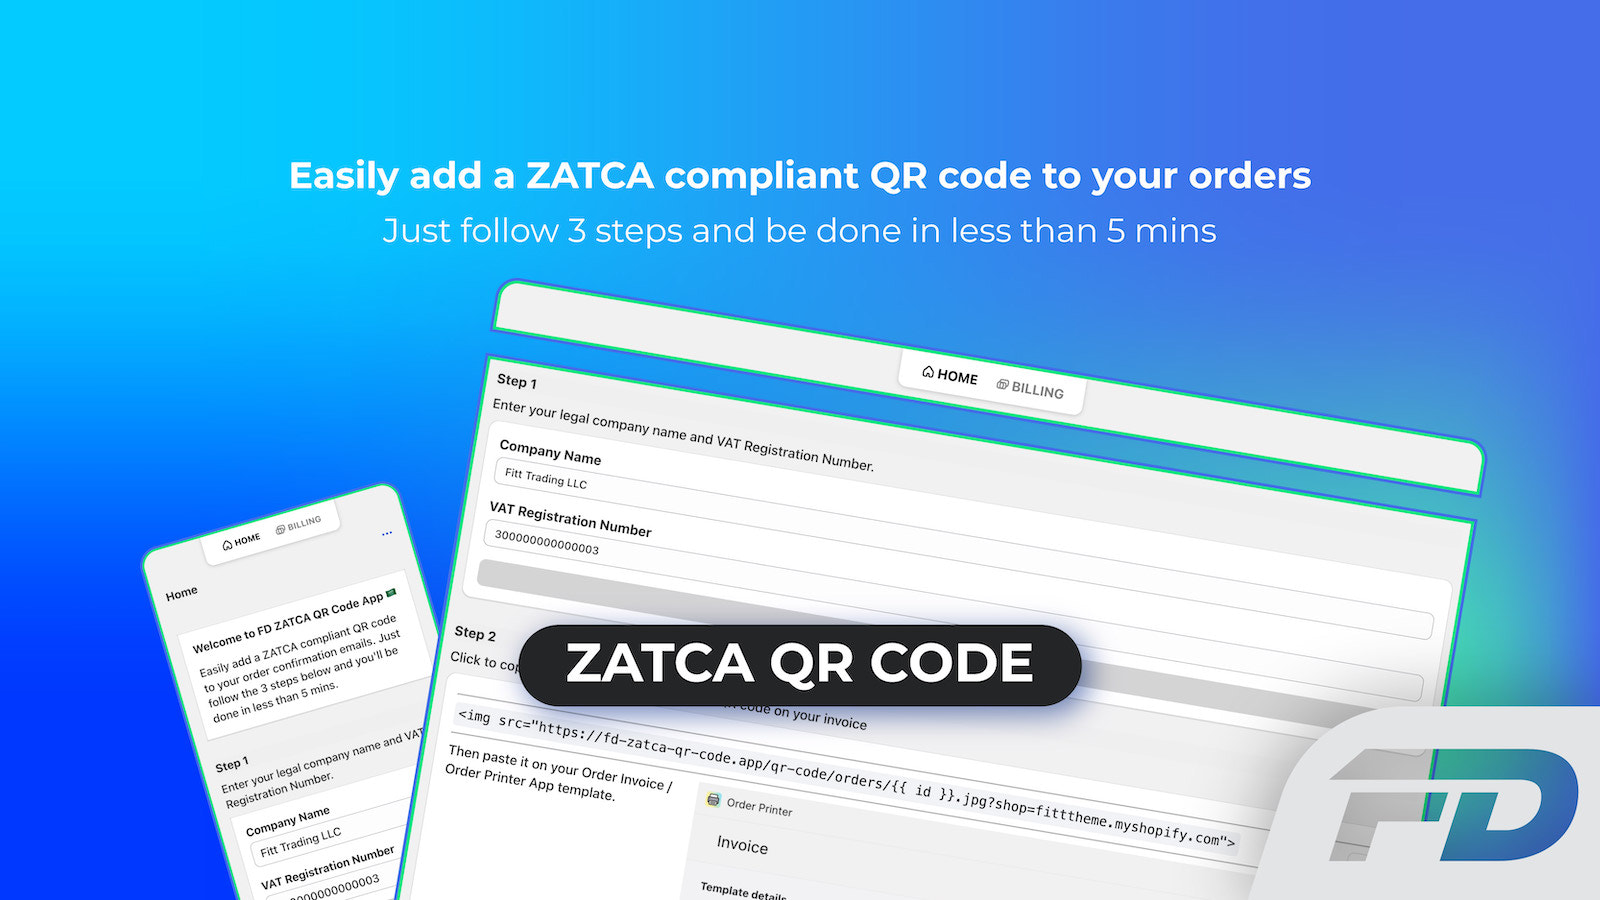 Automatic ZATCA / Fatoora compliant QR code for your orders